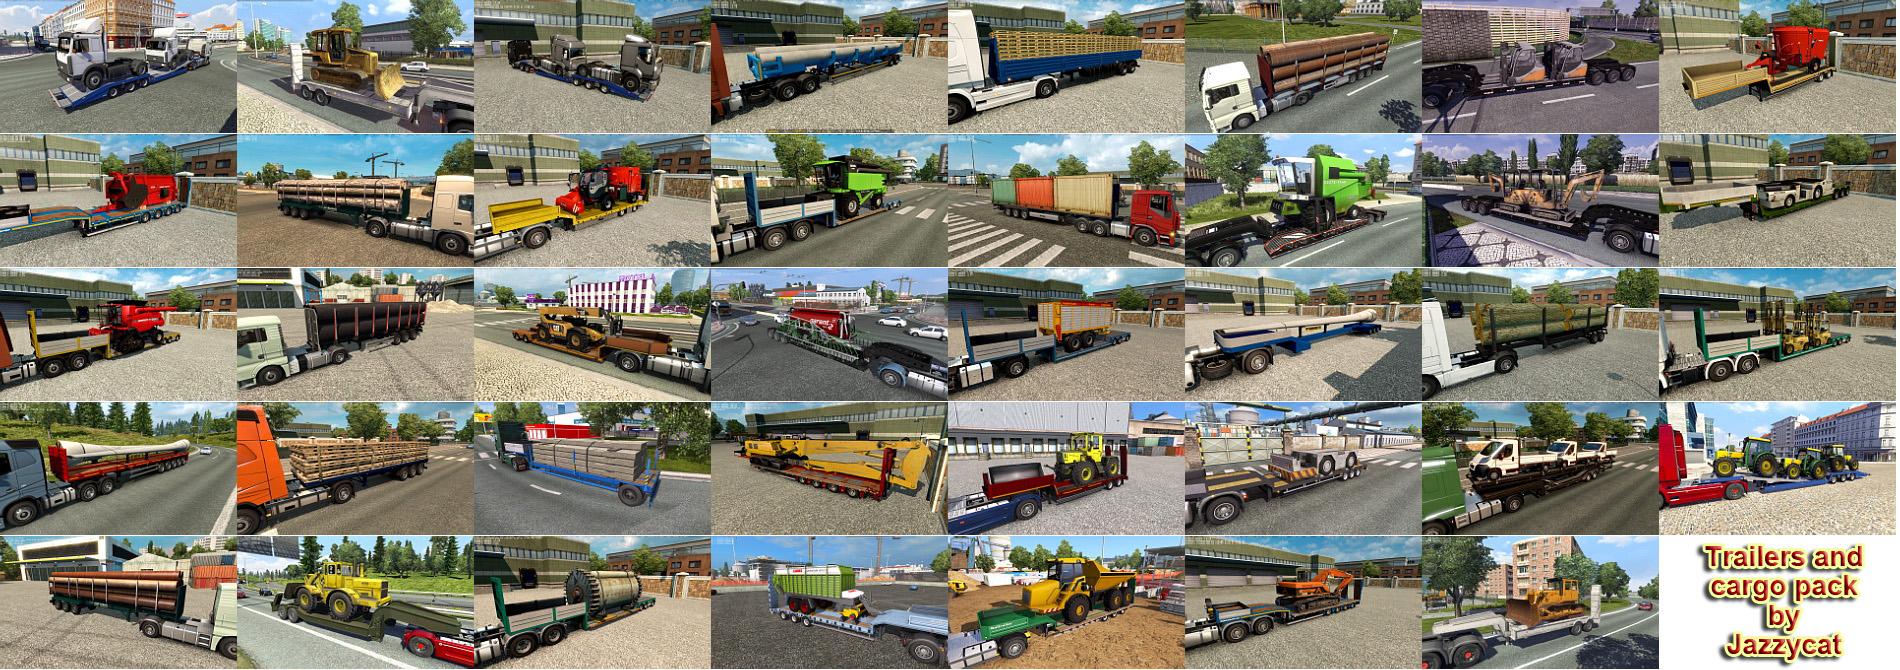 Trailers and cargo pack by jazzycat V6.5 ETS2.